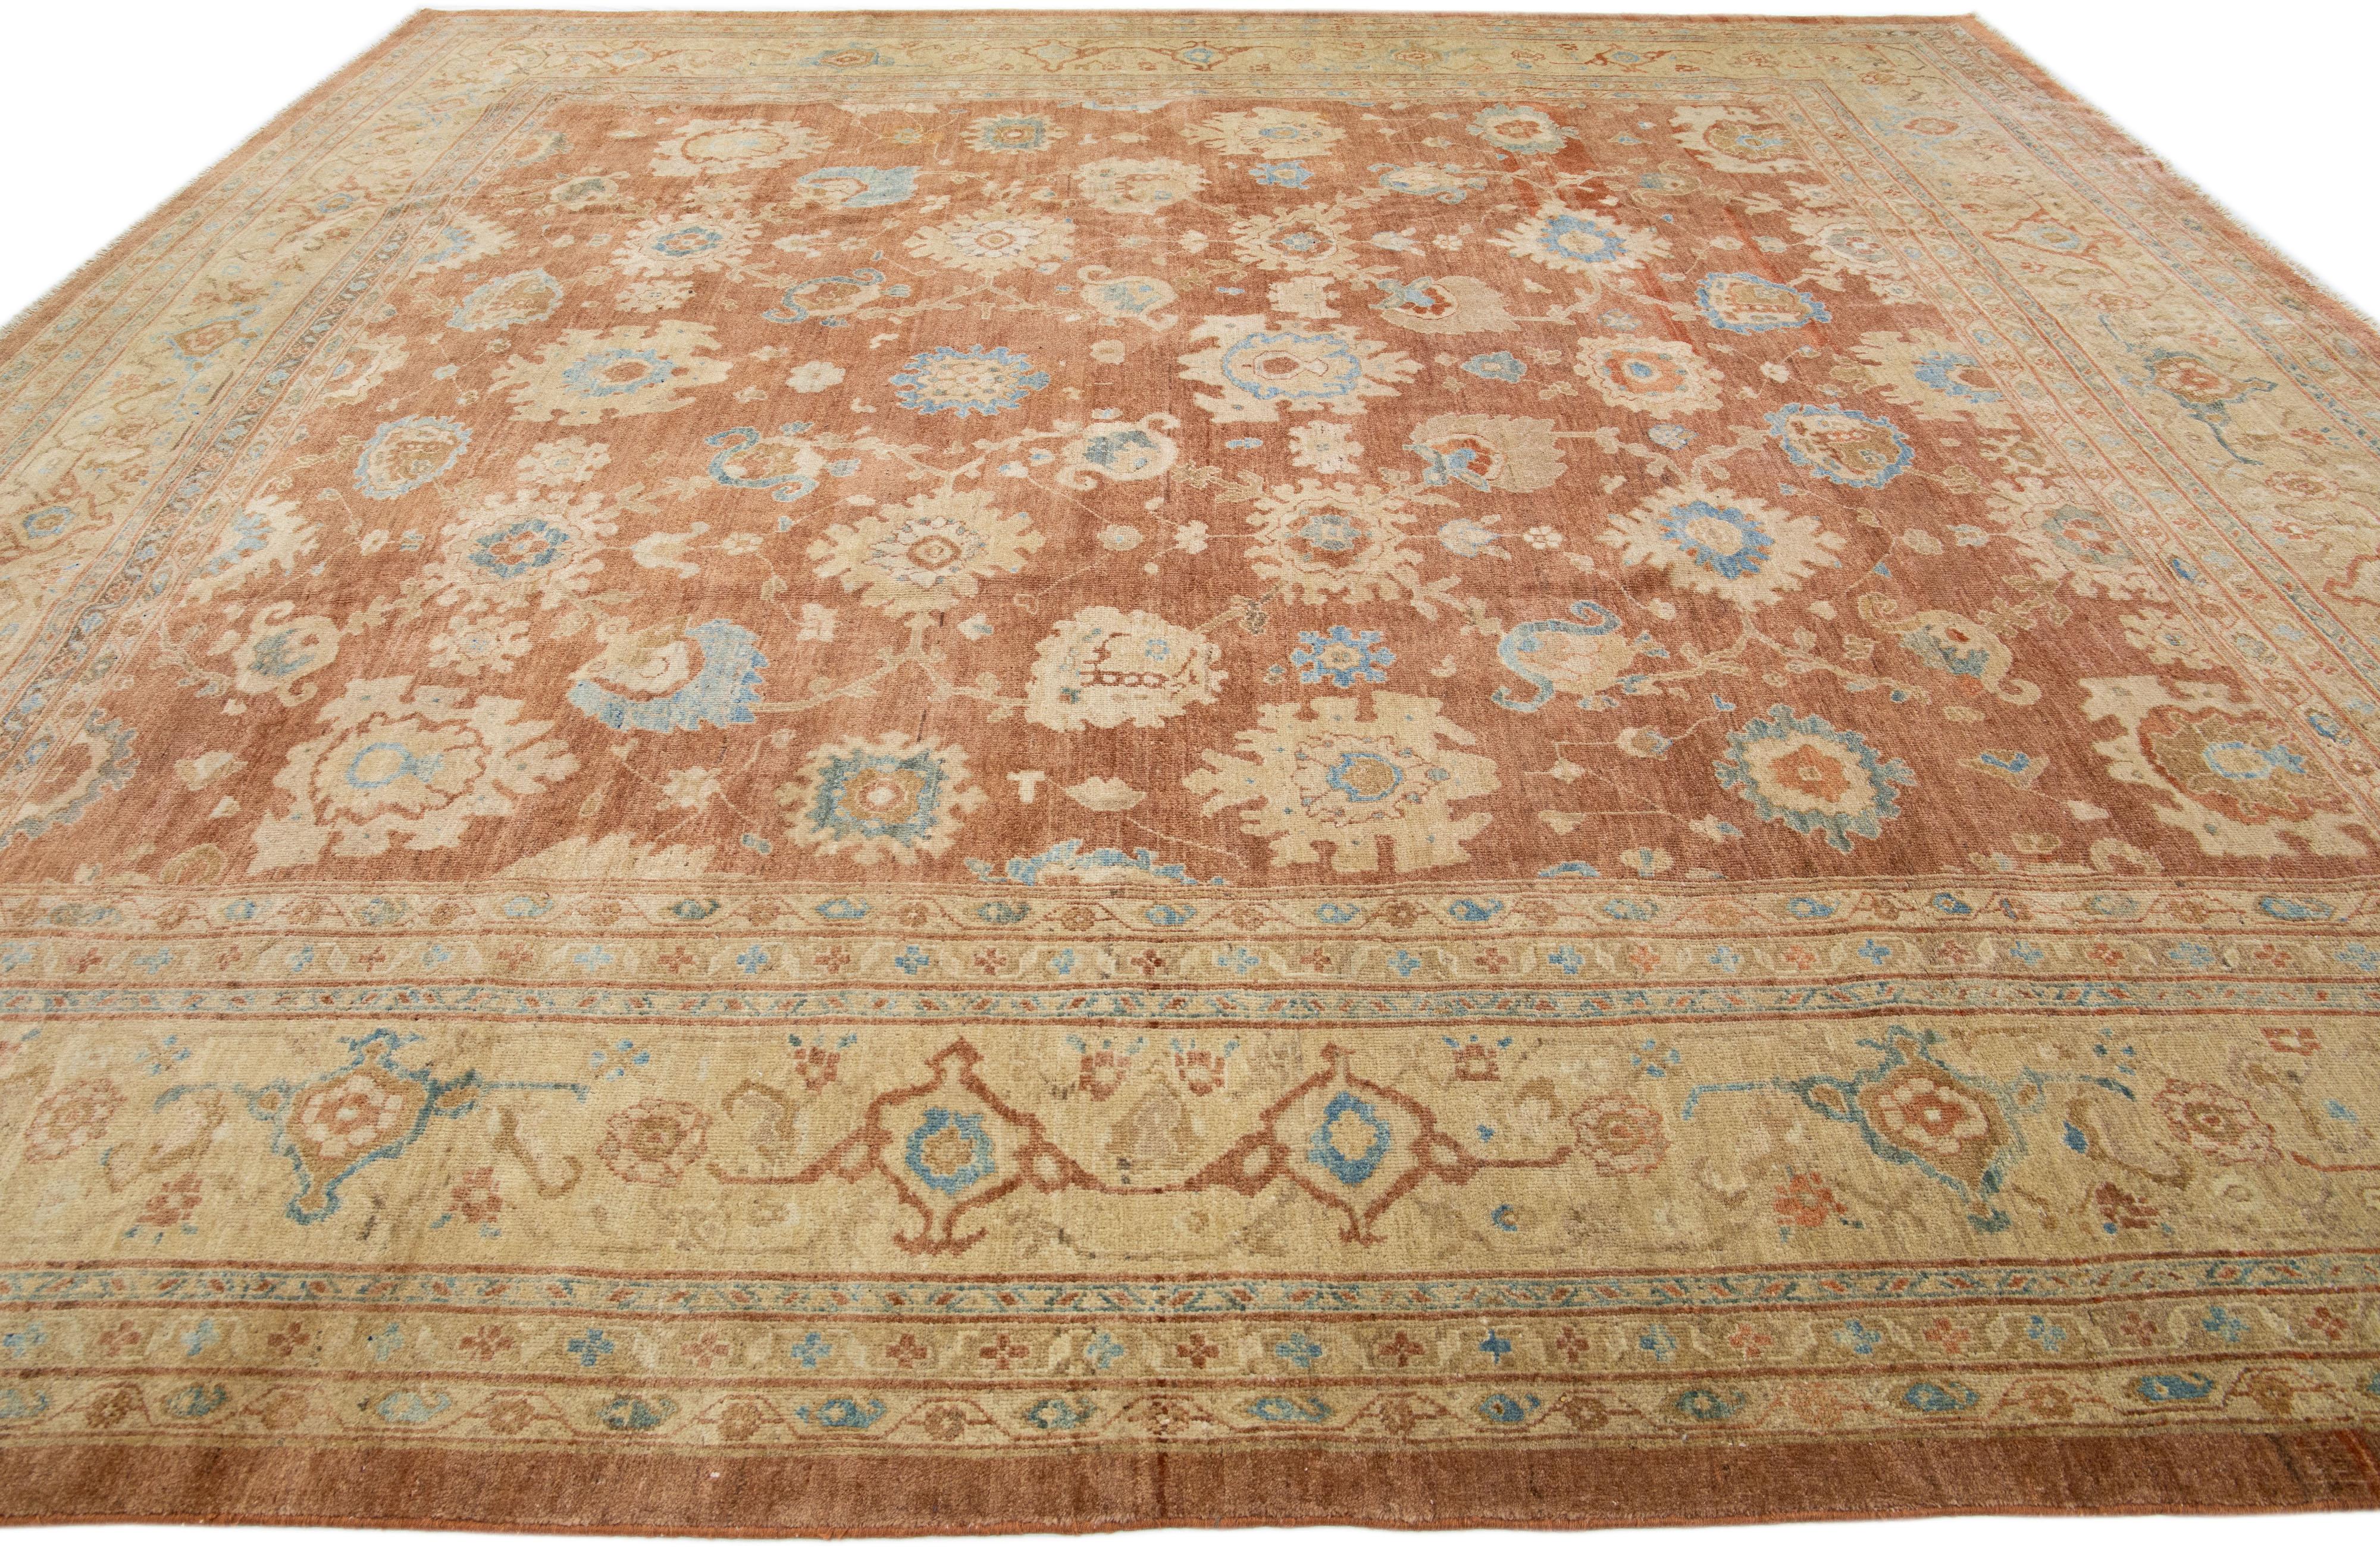 Contemporary Handmade Square Modern Sultanabad Wool Rug In Brown With Floral Motif For Sale